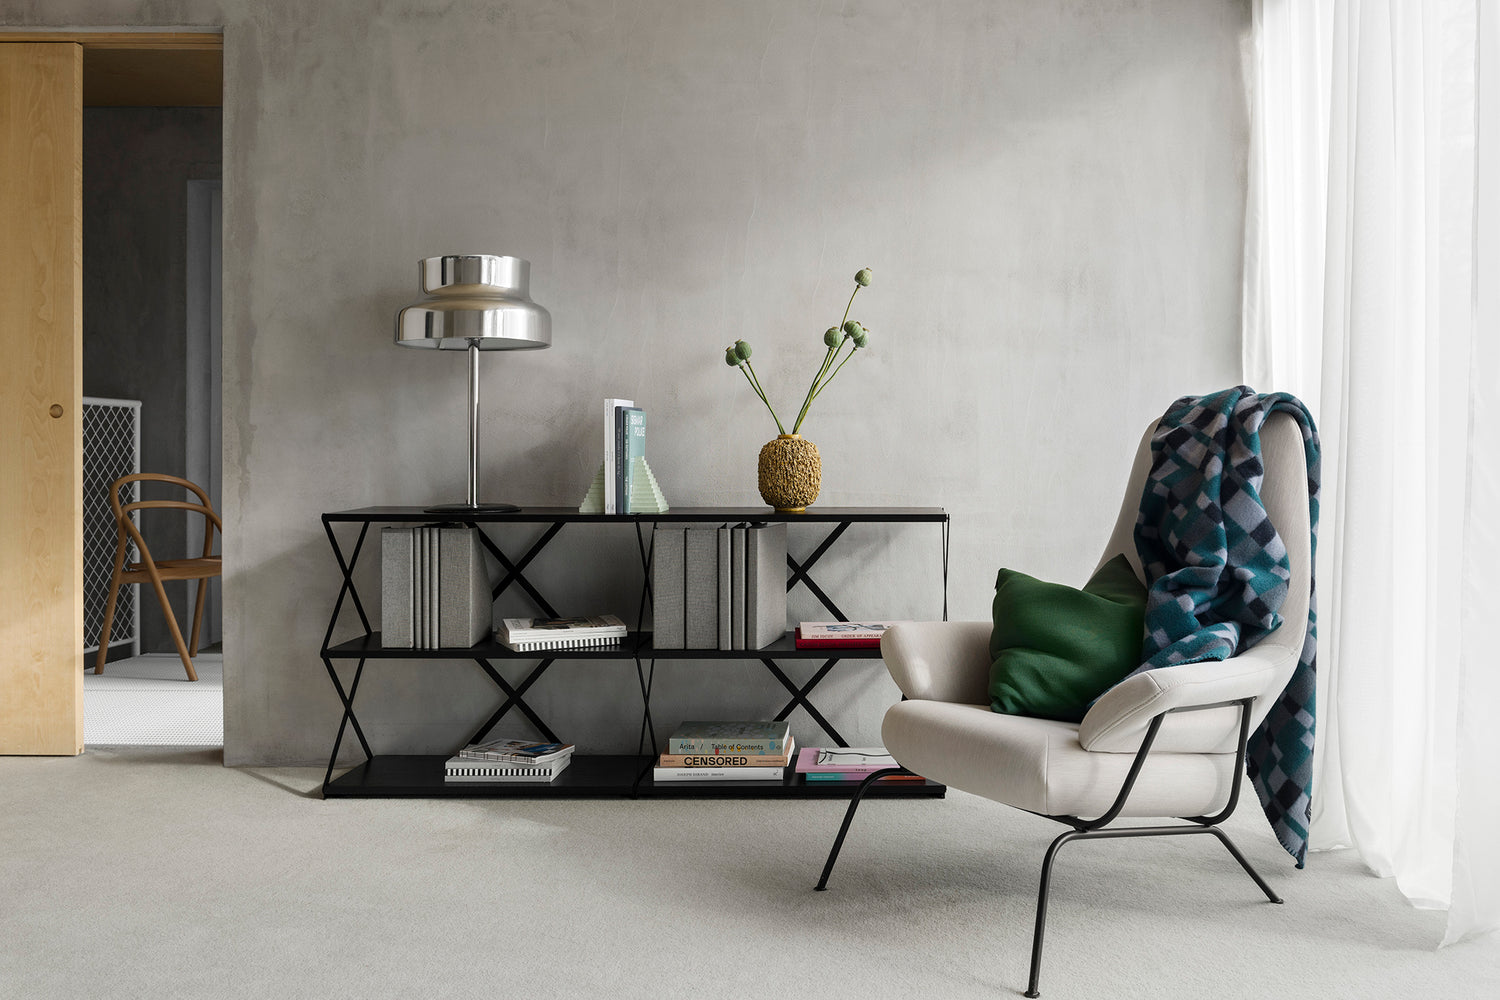 A living room / lounge scene featuring a Hai Lounge Chair in Shell with a Vienna Throw draped over it, and a Lift Shelf 6 in Black behind.